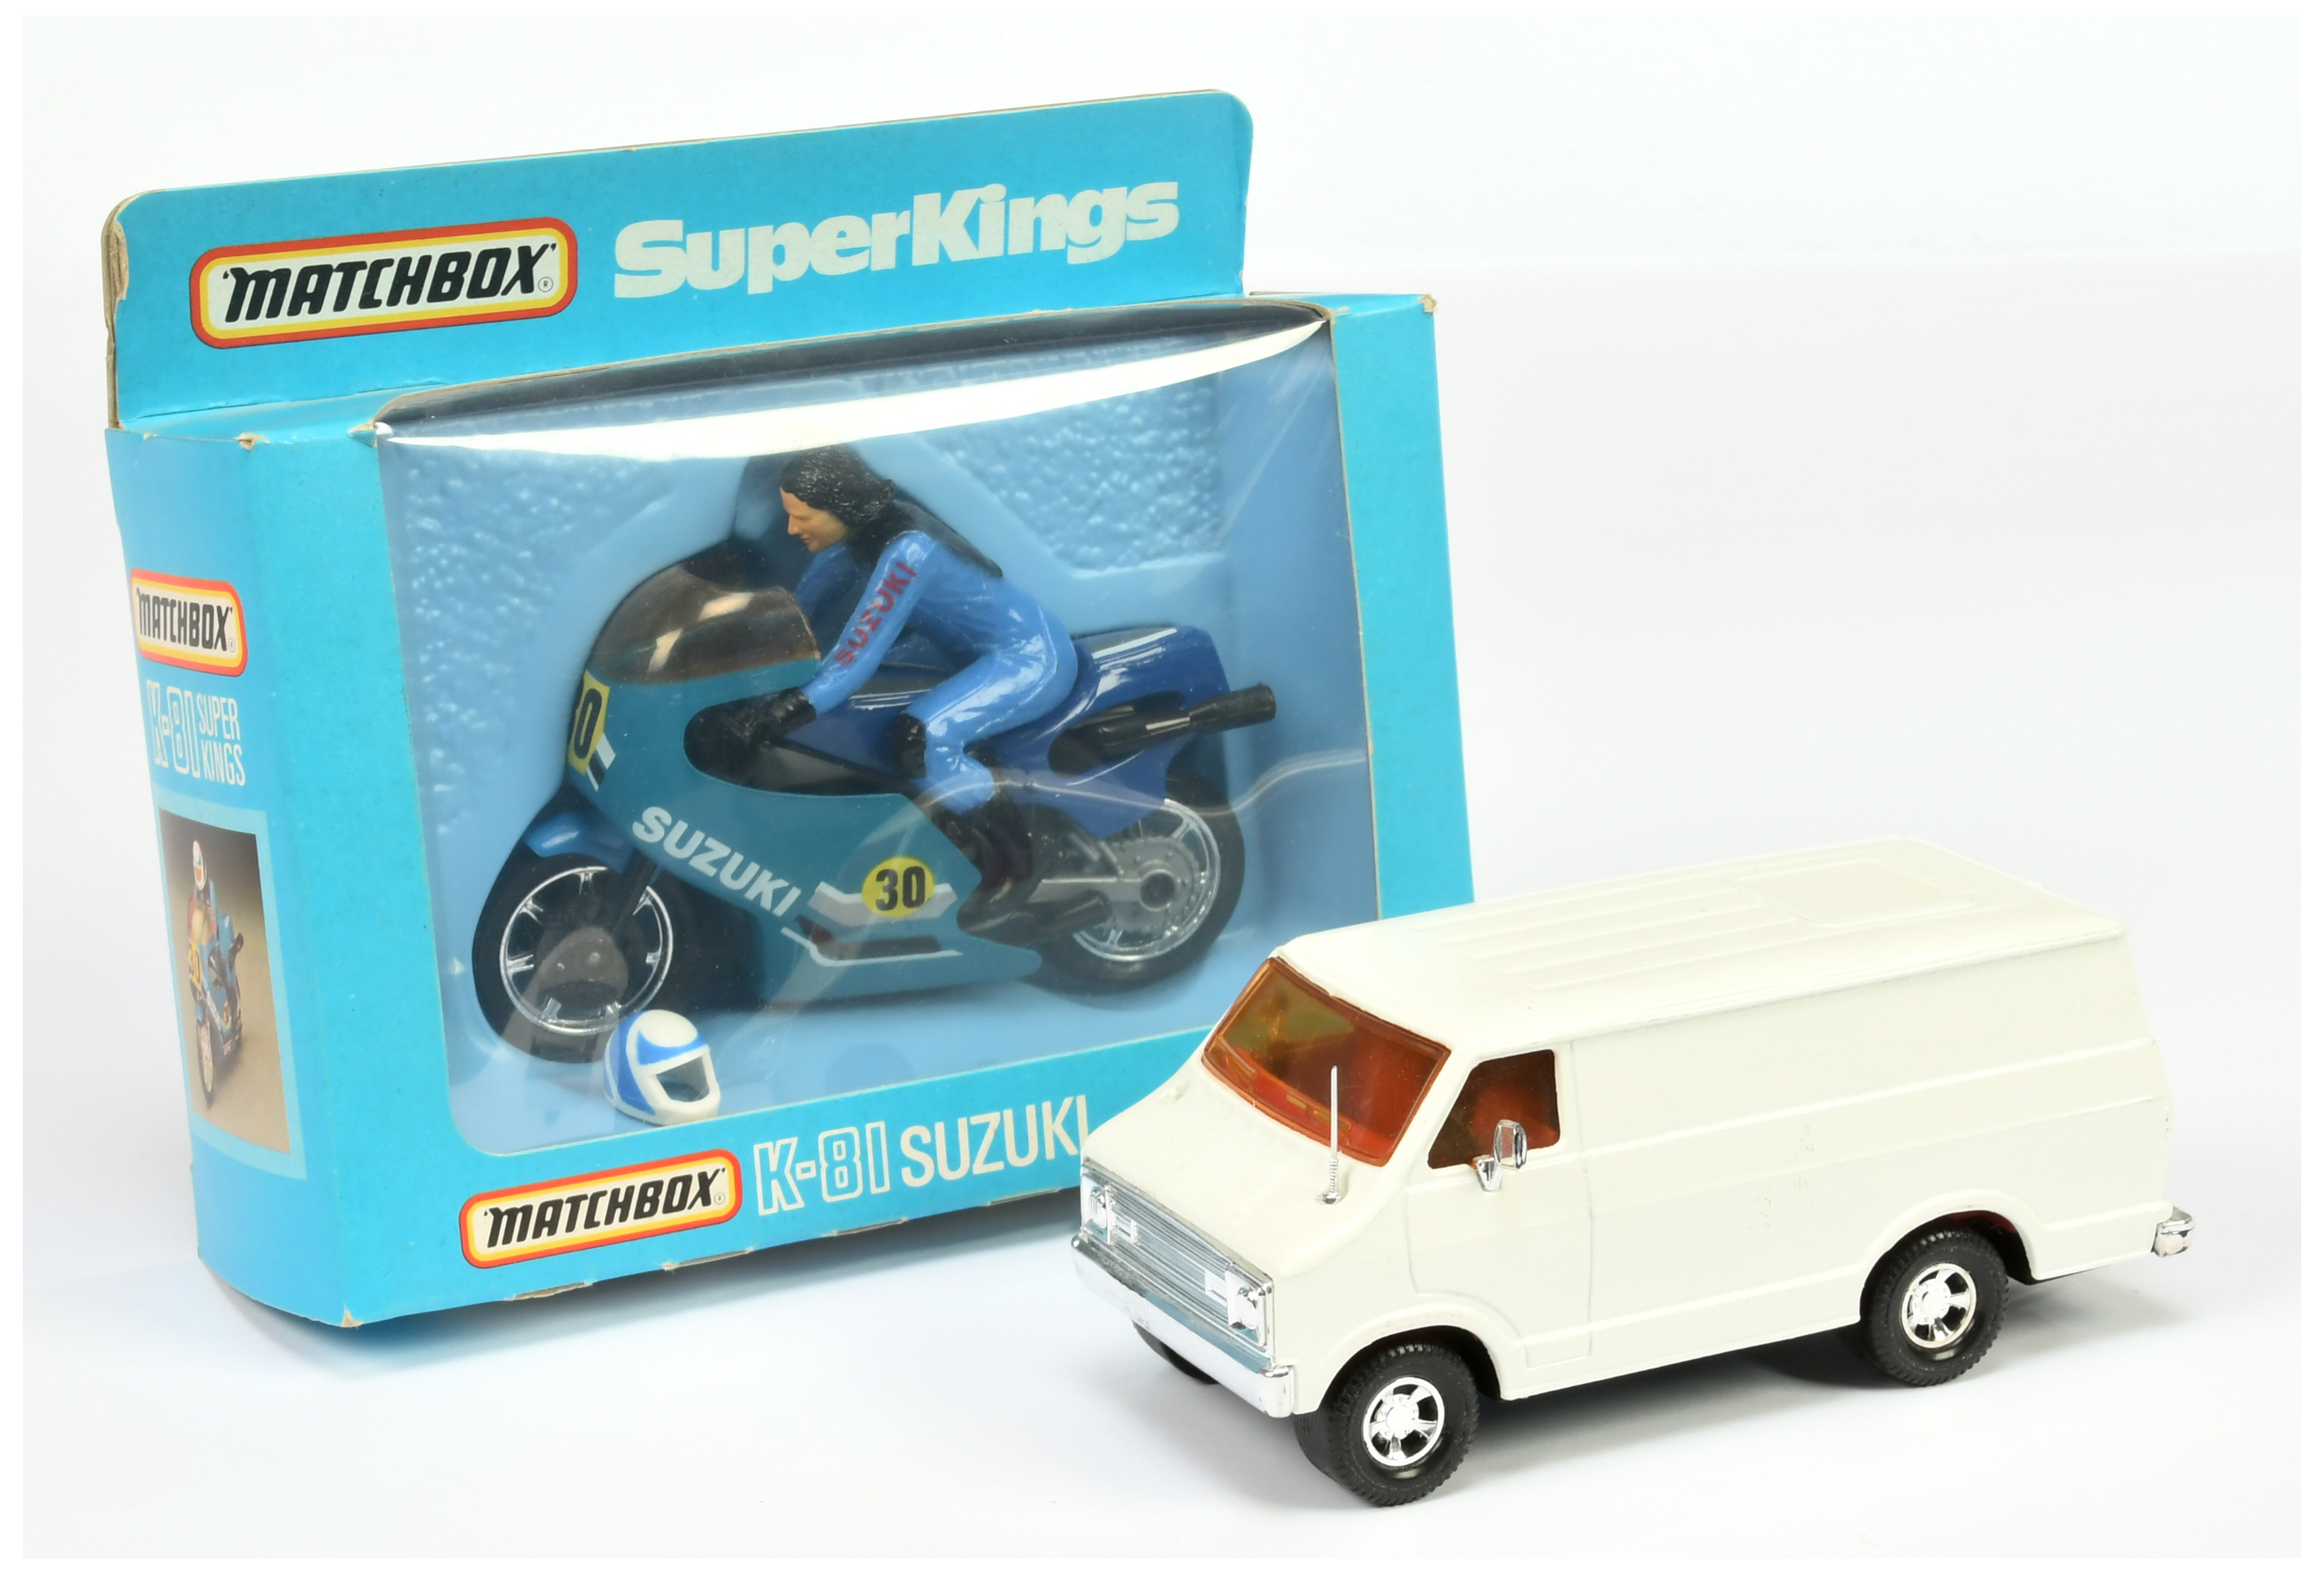 Matchbox Super Kings pair (1) K81 Suzuki Motorcycle - blue with racing number 30 tampo print Mint...